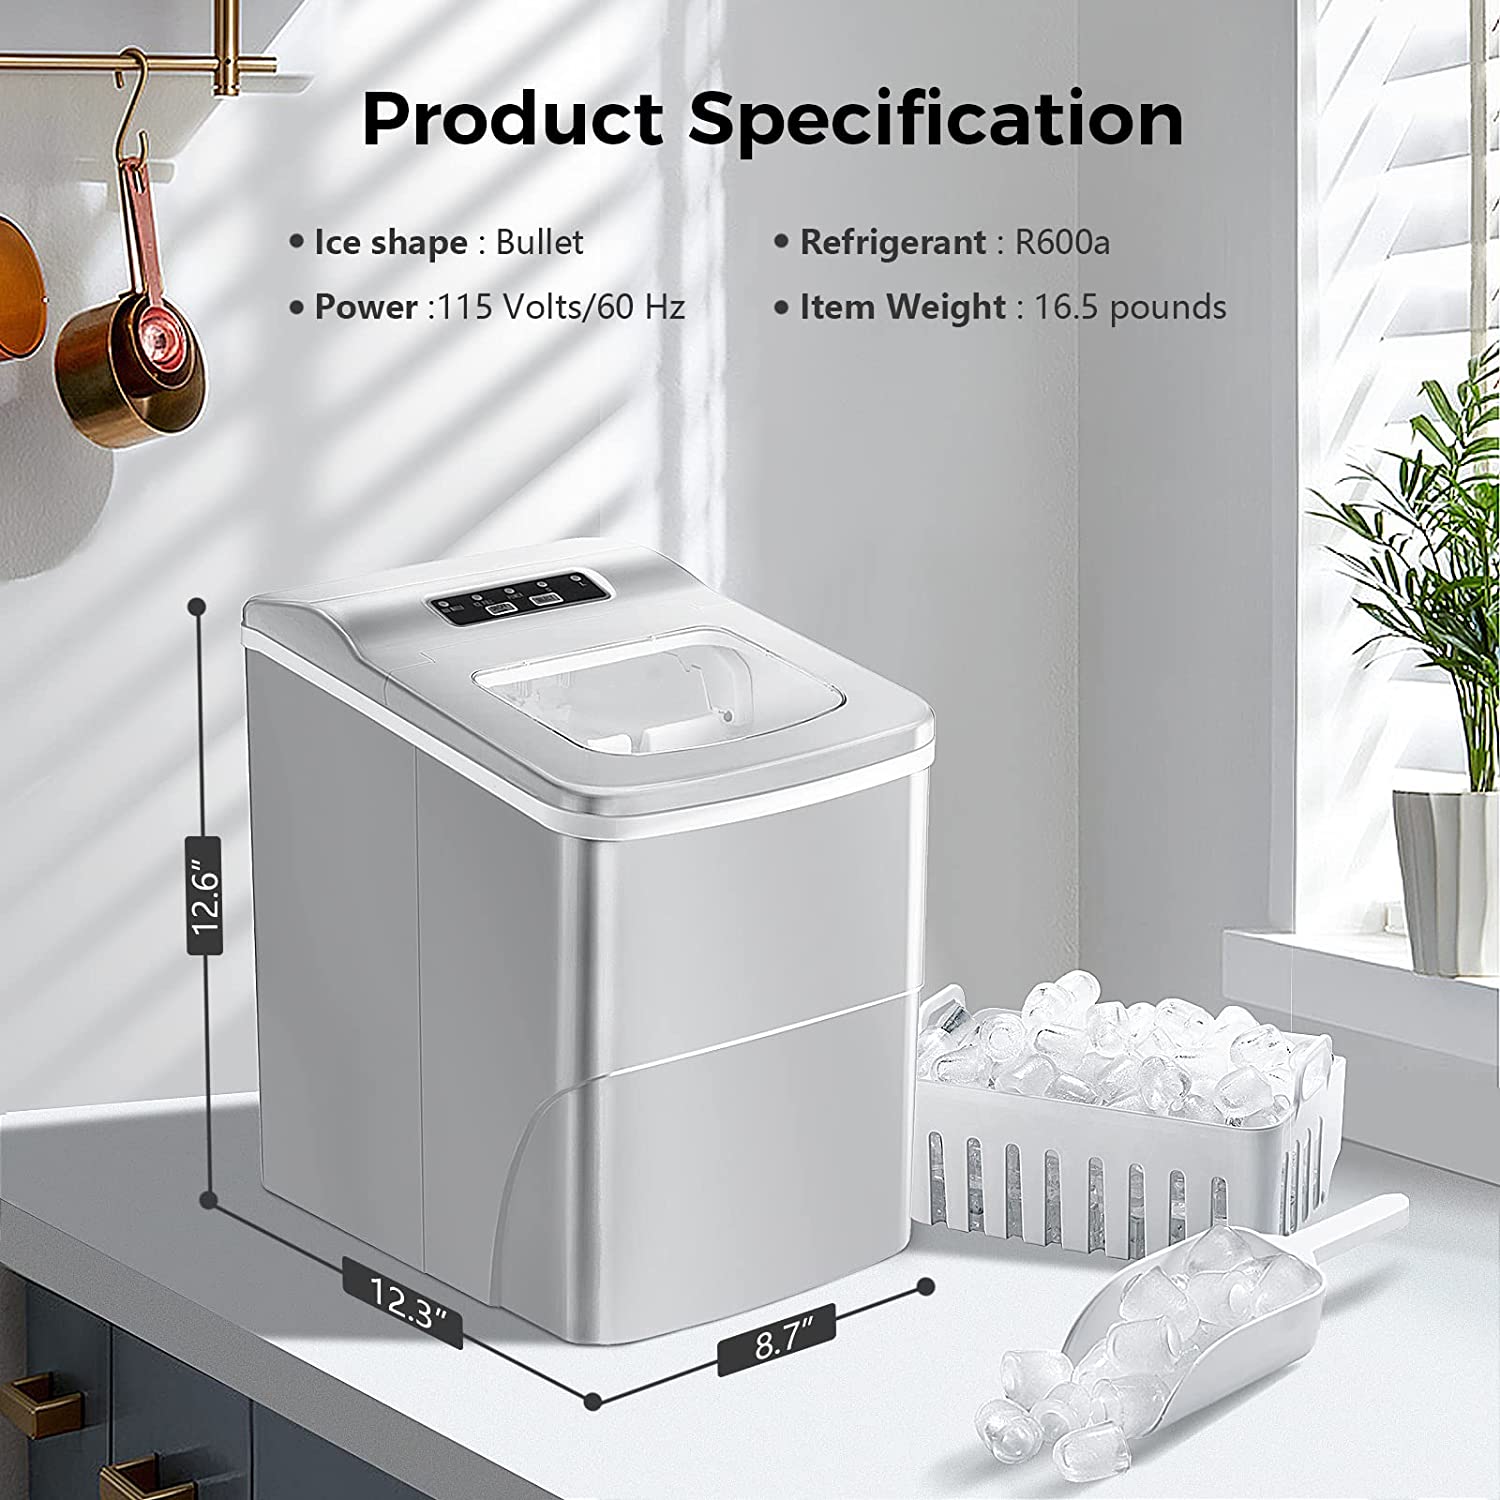 https://bigbigmart.com/wp-content/uploads/2023/05/AGLUCKY-Countertop-Ice-Maker-Machine-Portable-Ice-Makers-Countertop-Make-26-lbs-ice-in-24-hrsIce-Cube-Ready-in-6-8-Mins-with-Ice-Scoop-and-Basket-Grey3.jpg